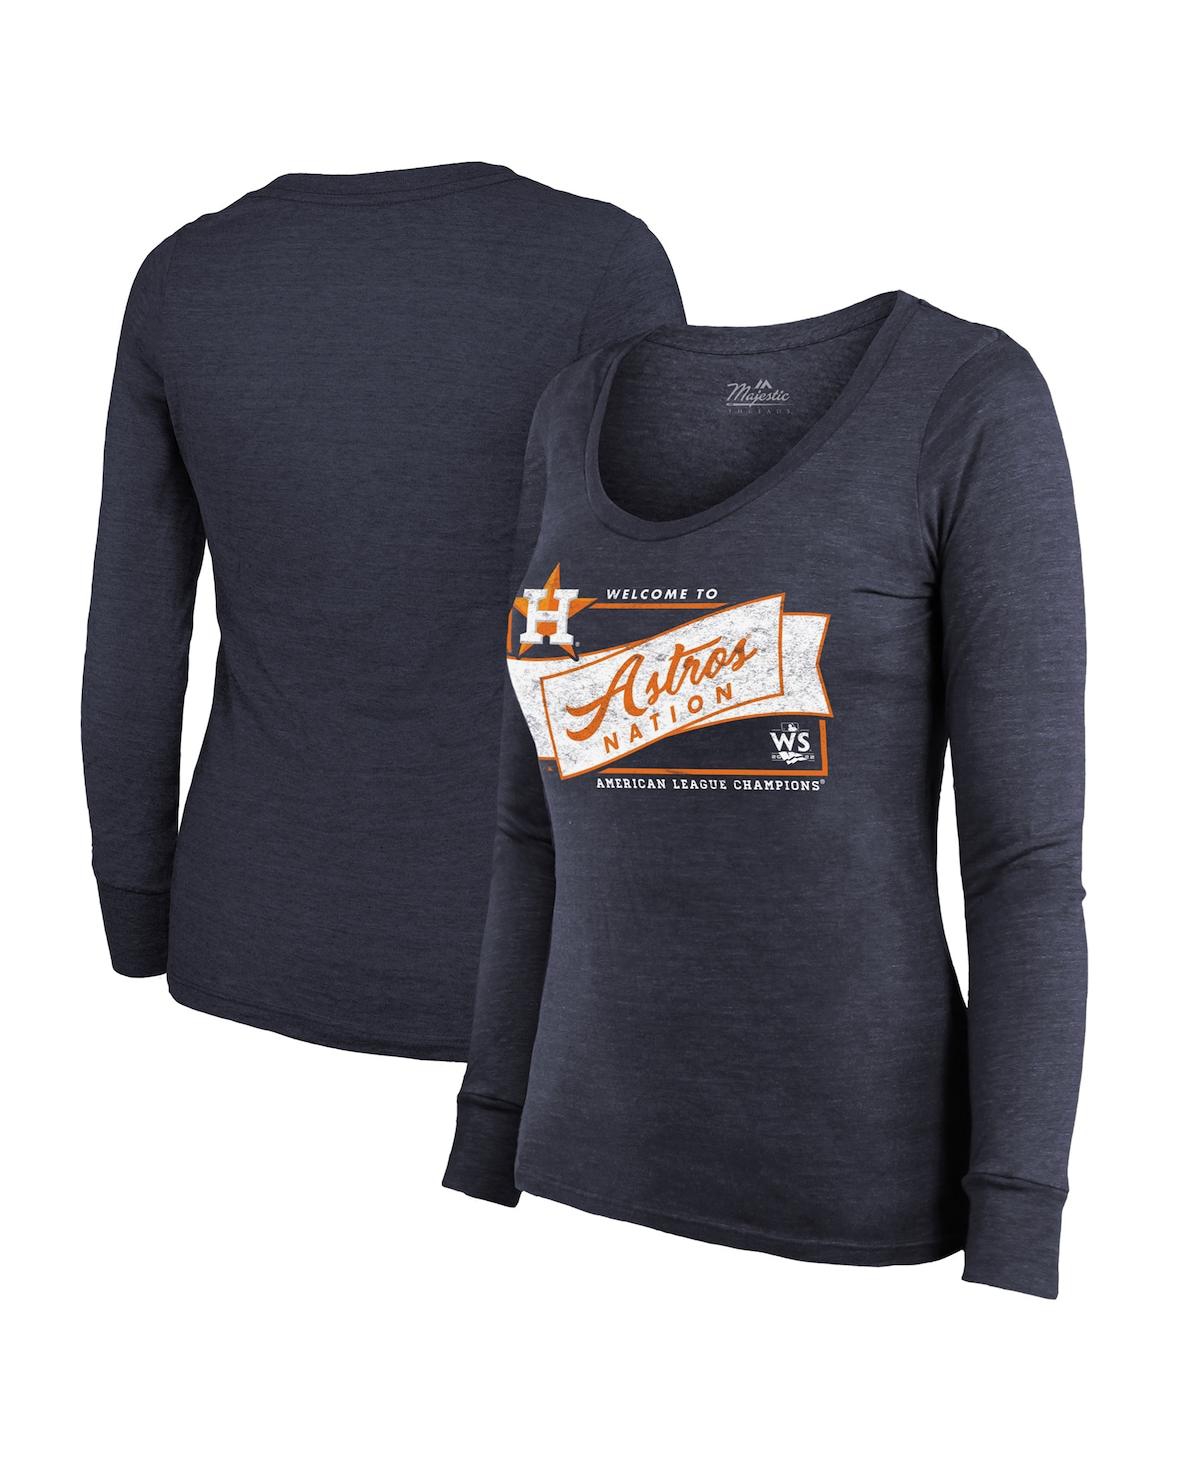 Women's Majestic Threads Navy Houston Astros 2022 American League Champions Tri-Blend Long Sleeve Scoop Neck T-shirt - Navy